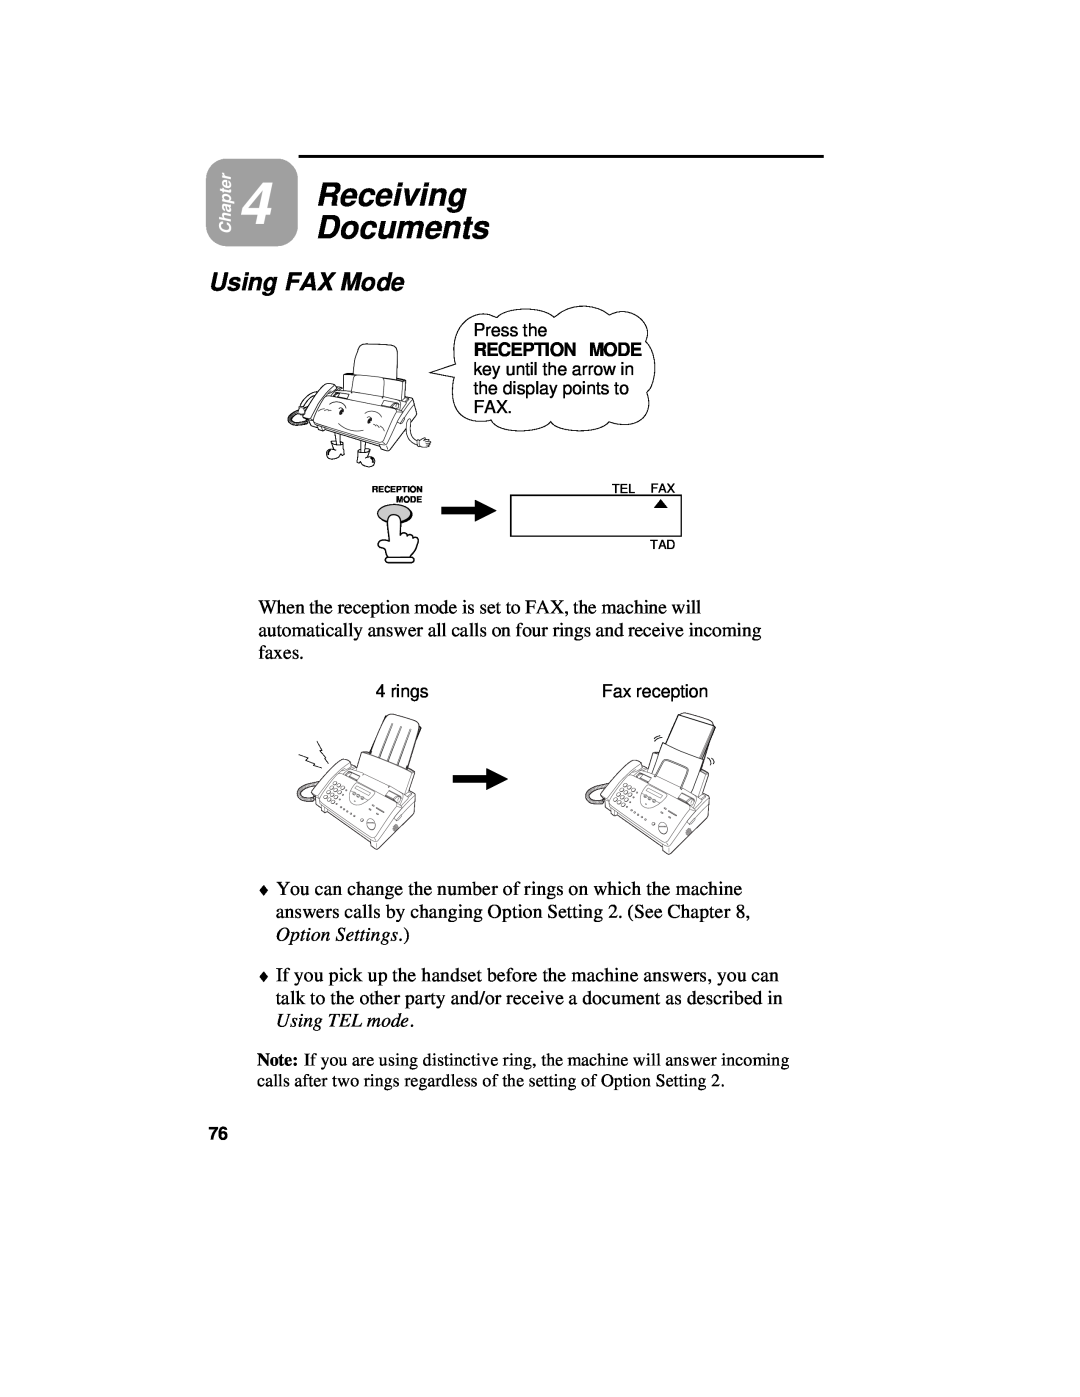 Sharp UX-460 operation manual Receiving Documents, Using FAX Mode 